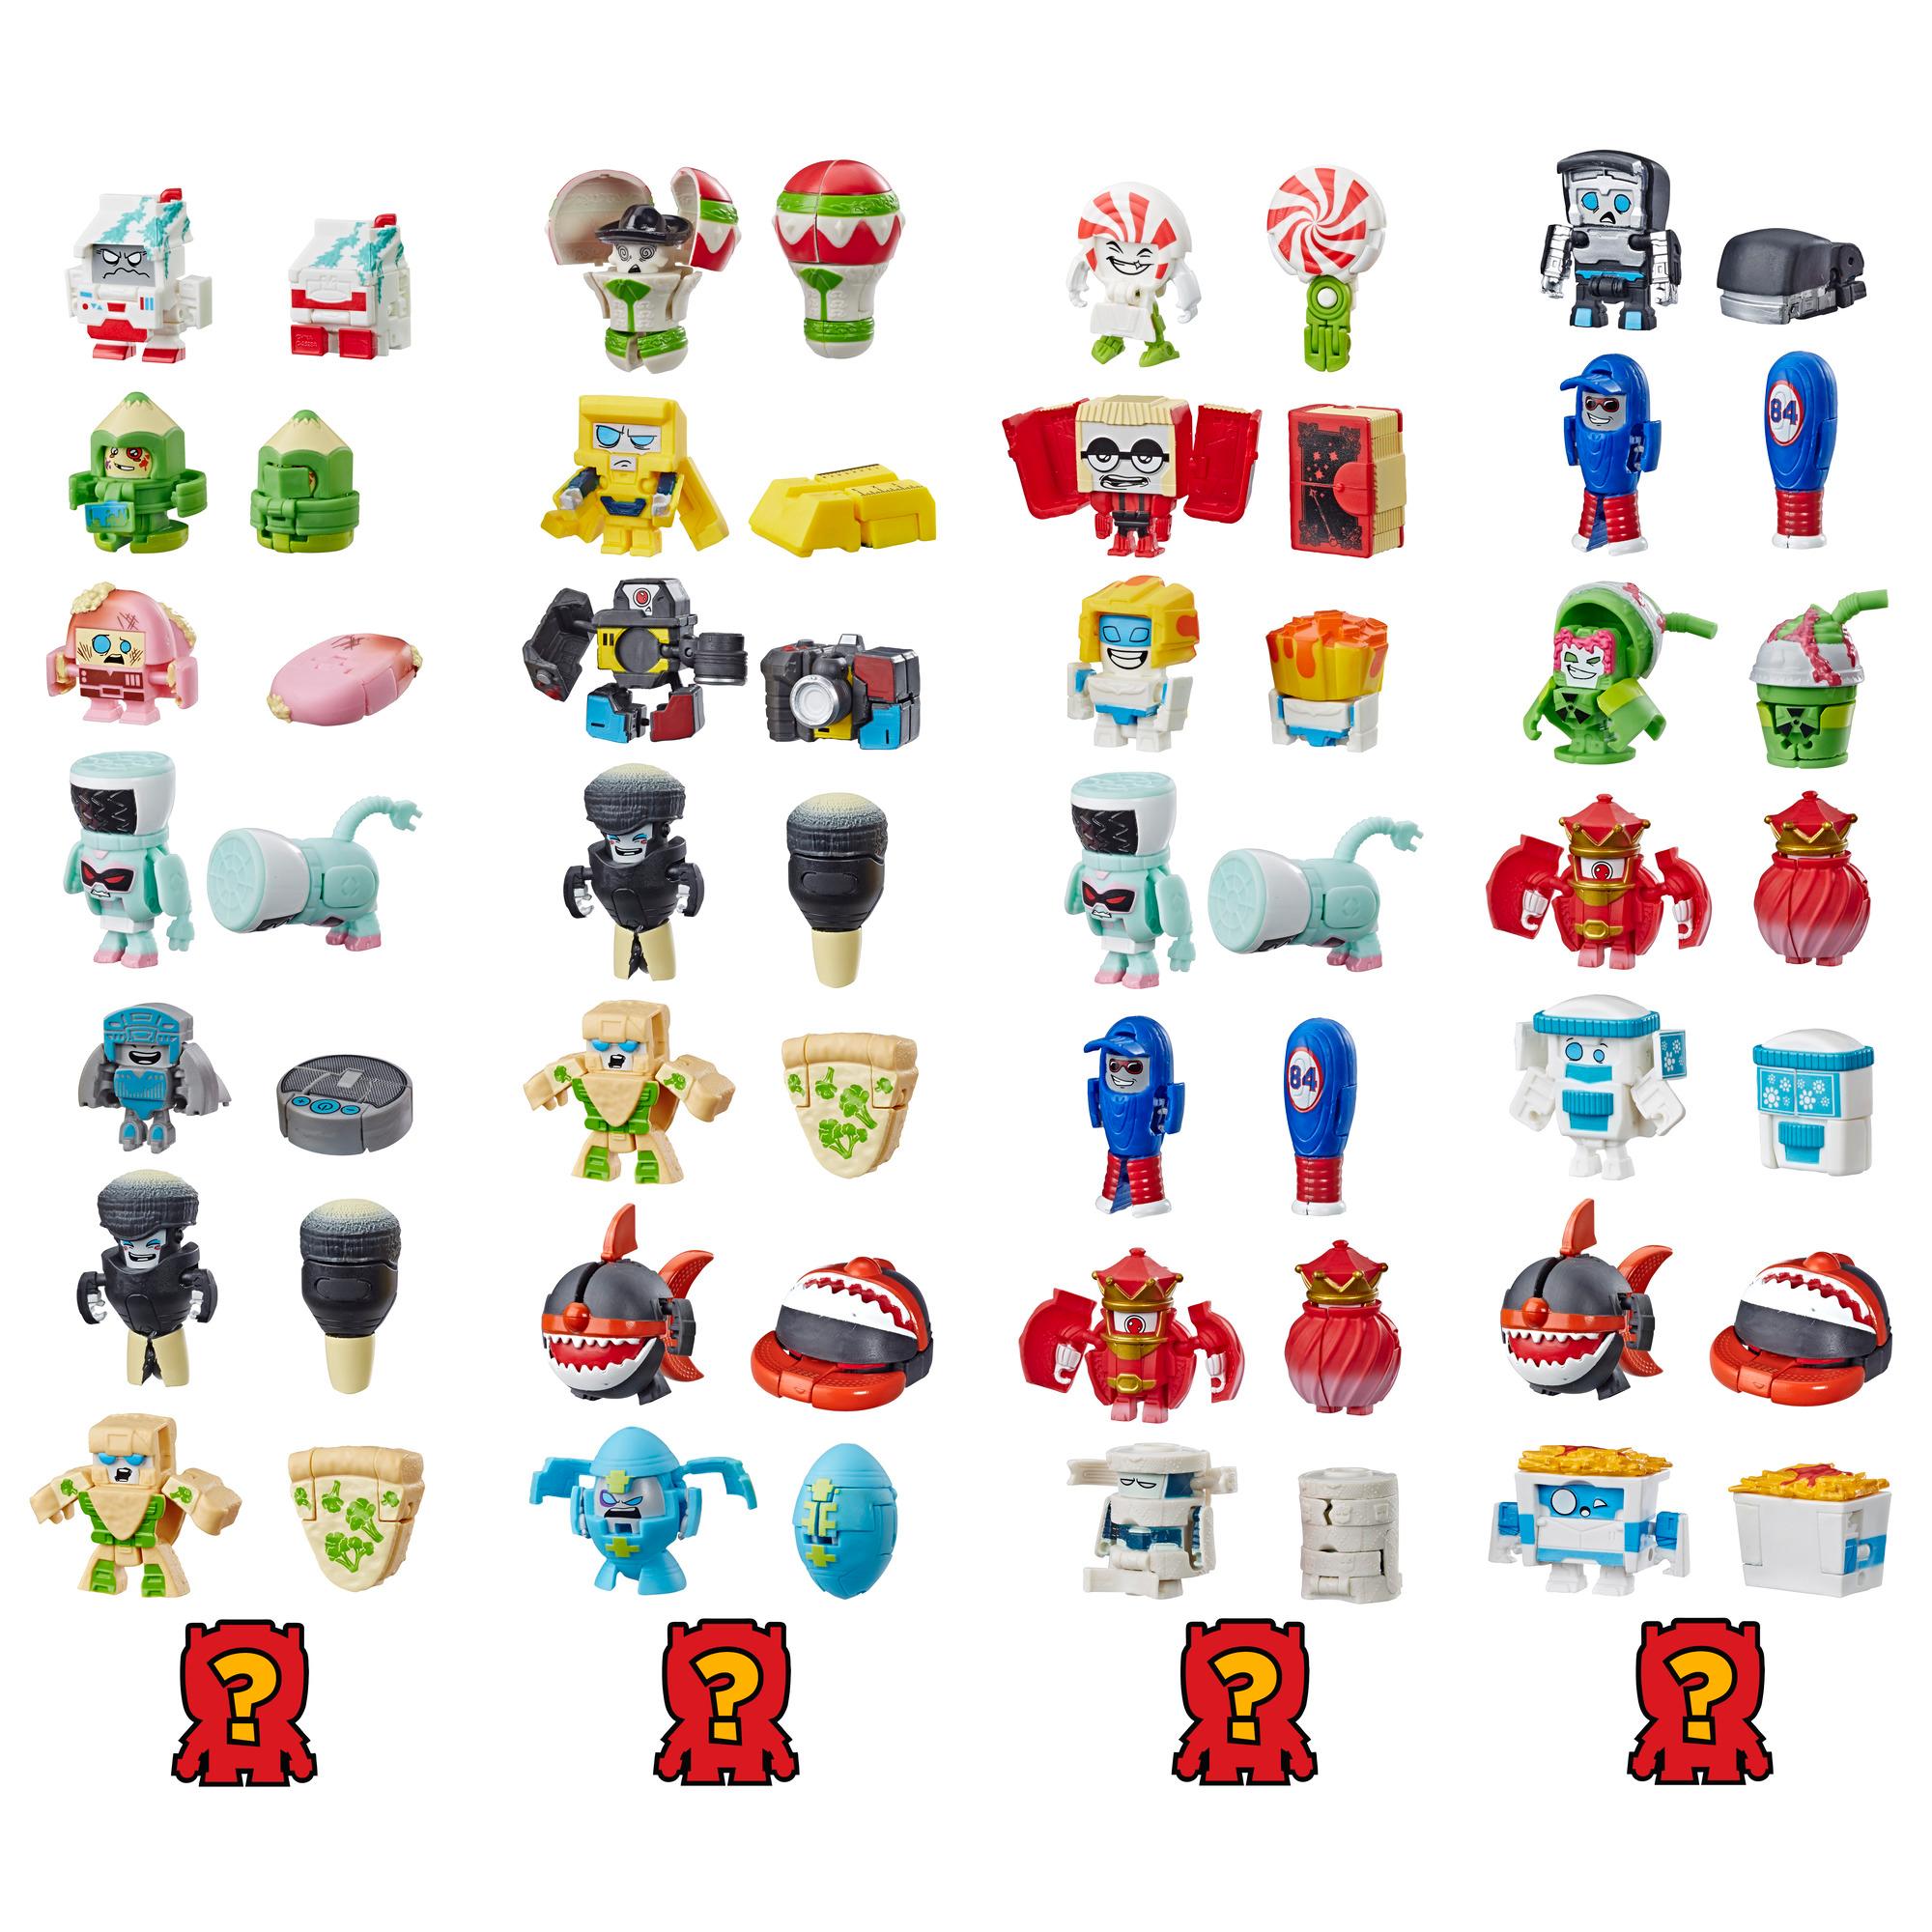 Transformers Toys BotBots Series 2 Swag Stylers 8-Pack – Mystery 2-In-1 Collectible Figures! Kids Ages 5 and Up (Styles and Colors May Vary) by Hasbro